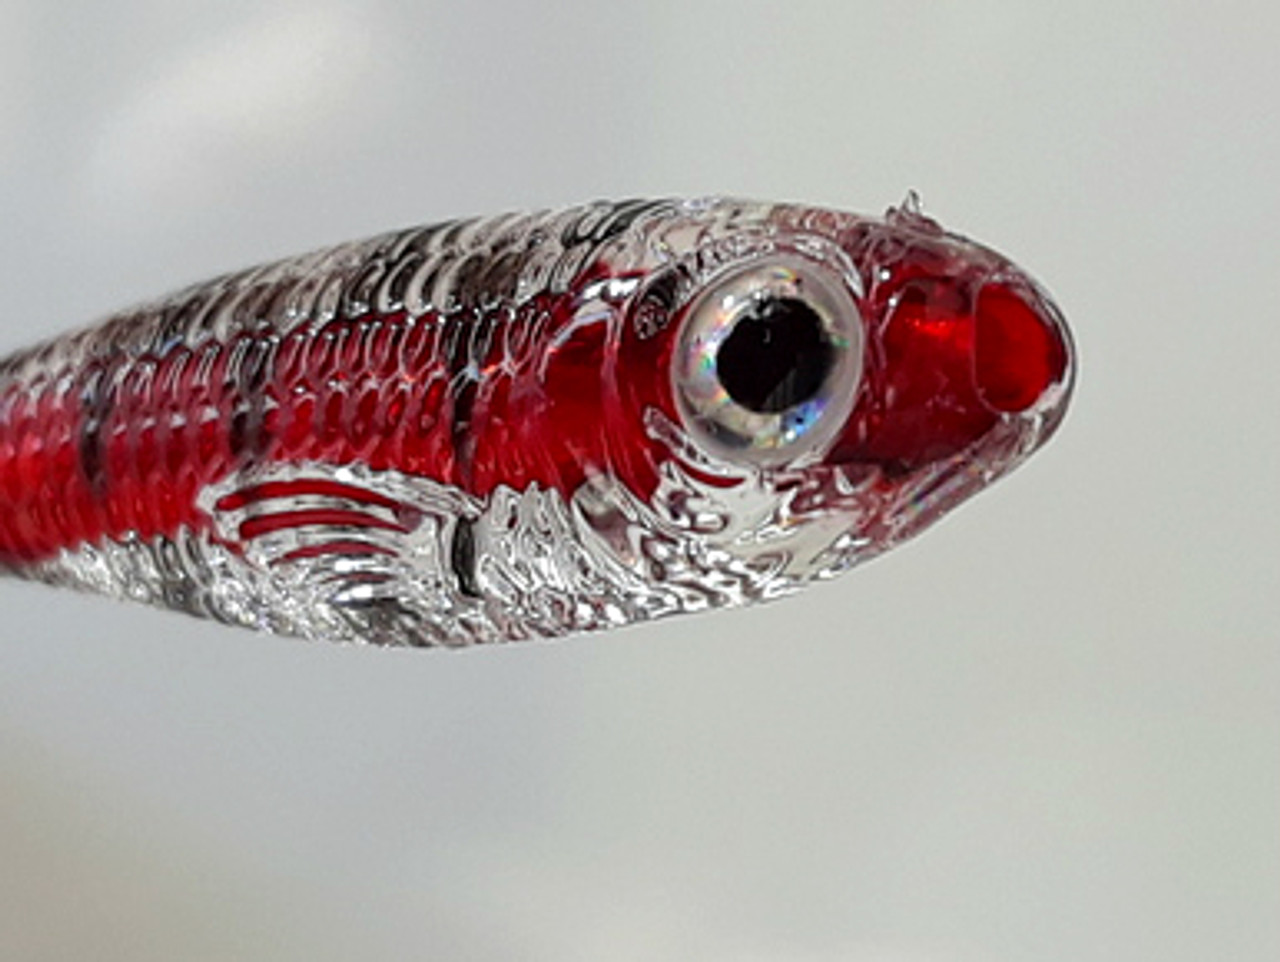 Looks Alive Minnow Beads CLEAR RED LINE PERCH 